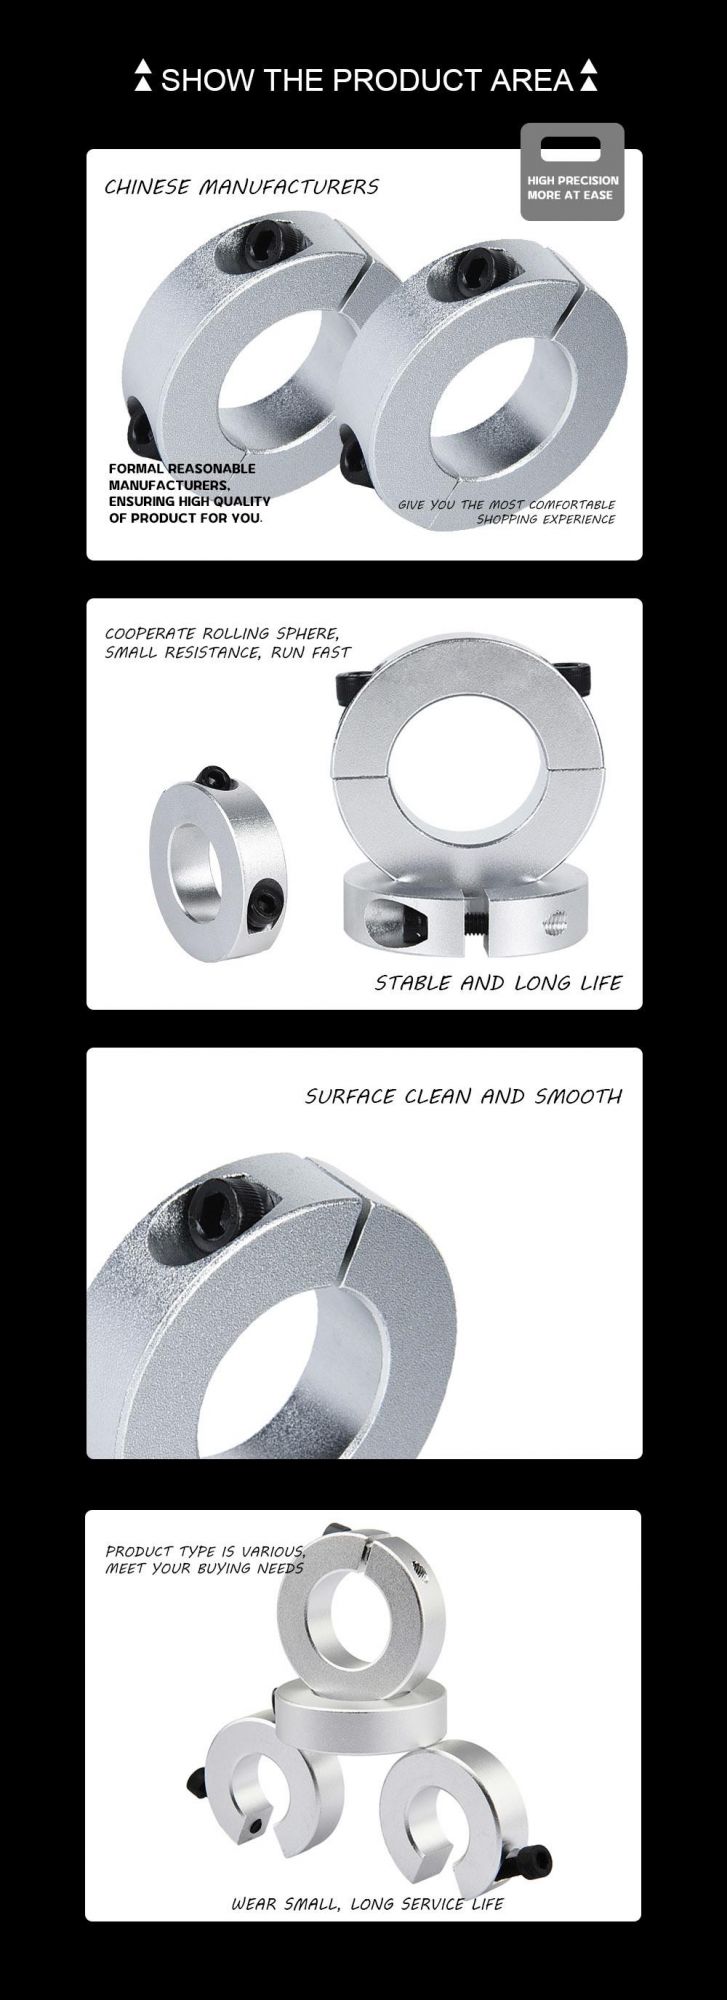 Aluminum Alloy Optical Shaft Seat Fixed Ring, Economical and Durable, Fixed Ring